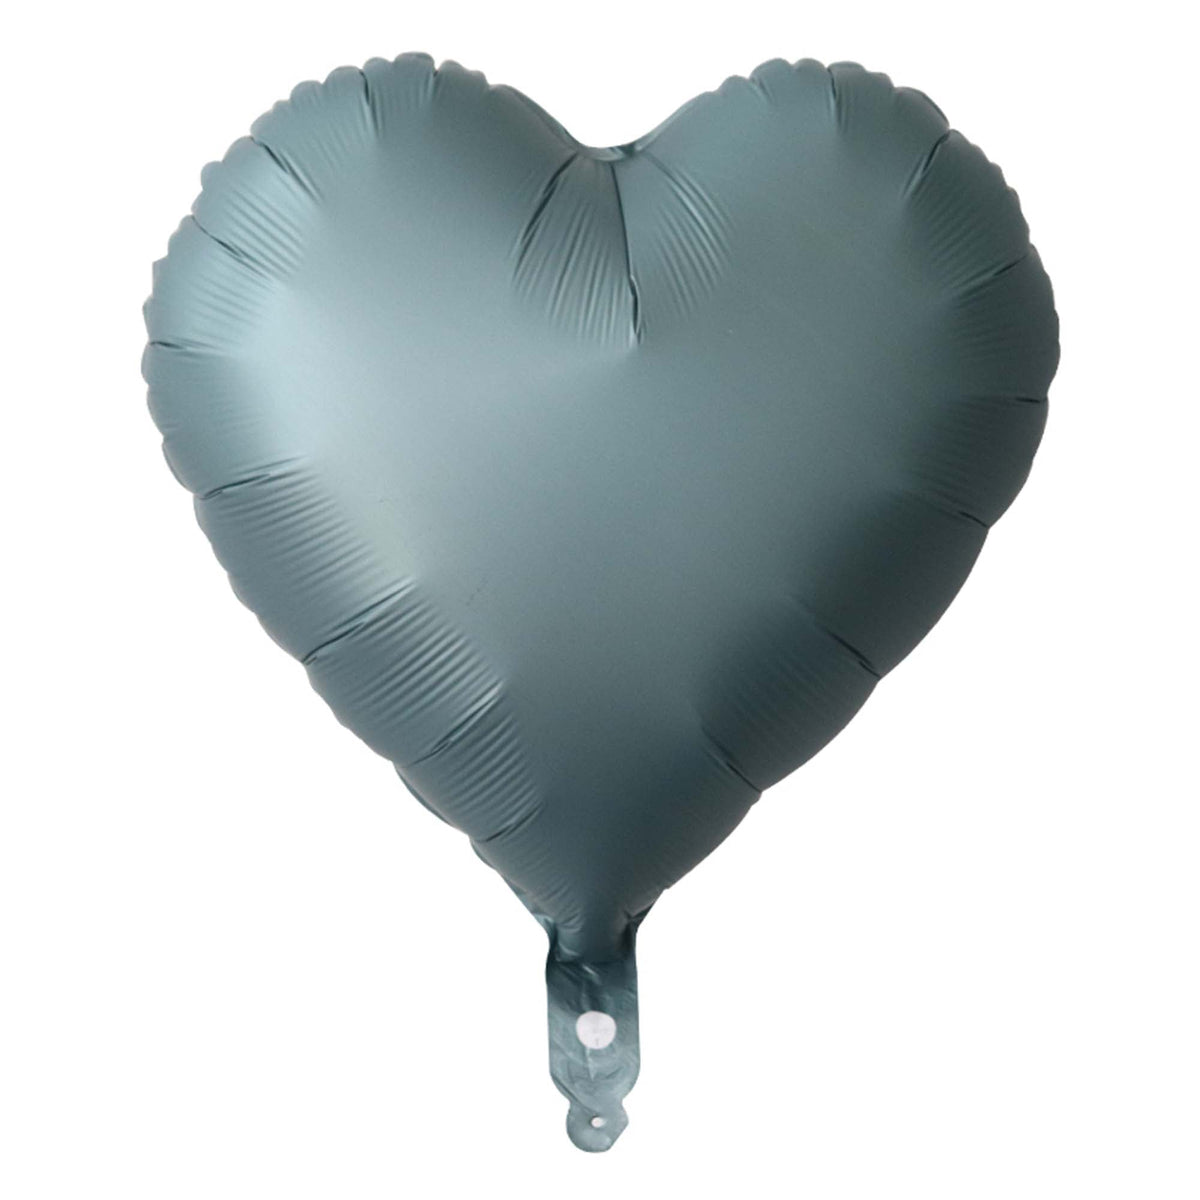 BOOMBA INTERNATIONAL TRADING CO,. LTD Balloons Satin Luxe Boho Green Heart Shaped Foil Balloon, 18 Inches, 1 Count